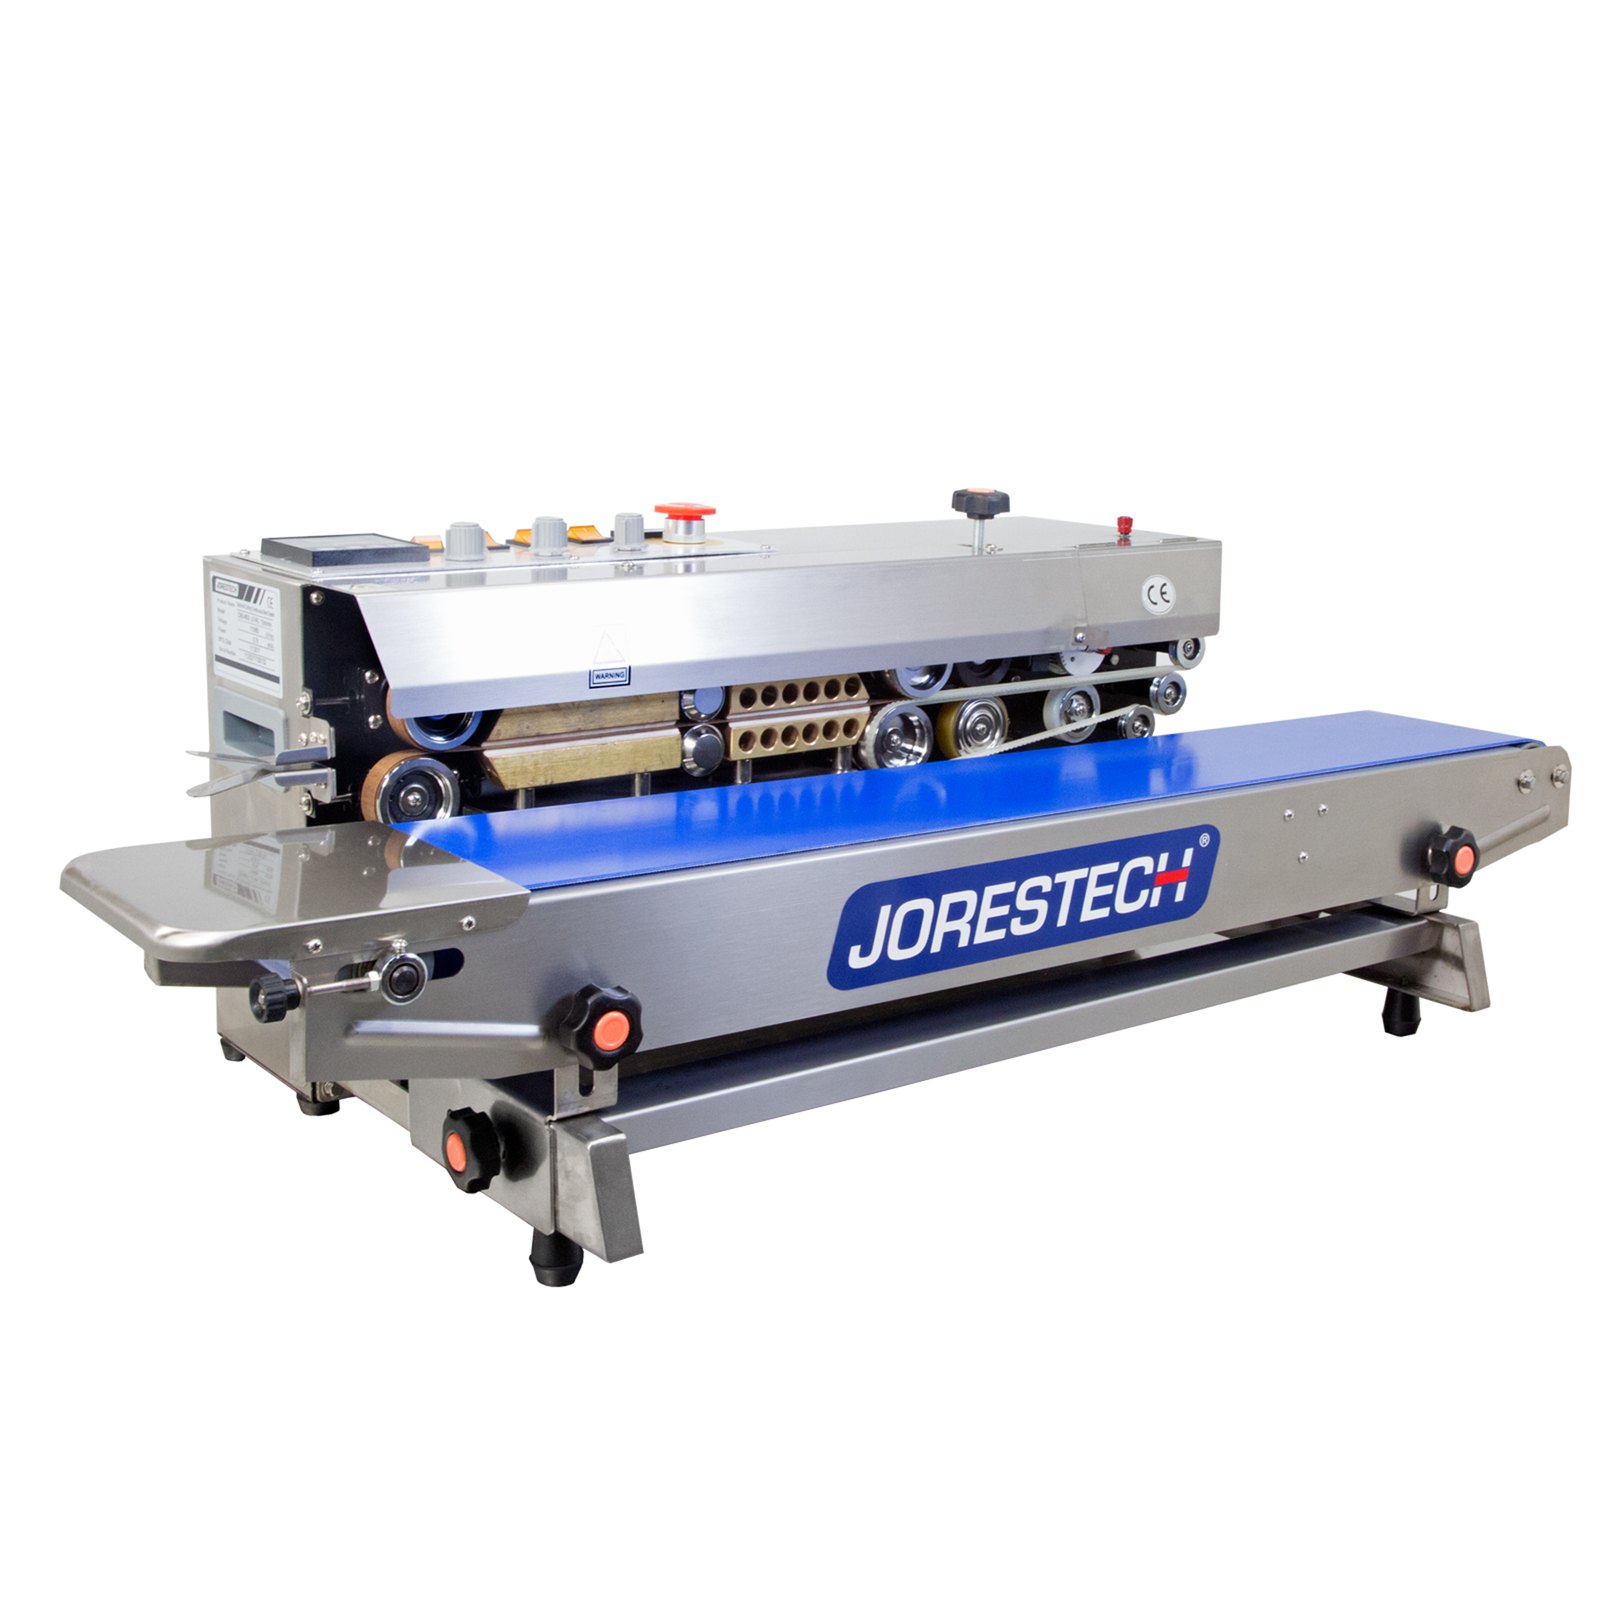 JORESTECH left to right continuous band with coder and digital temperature control sealer in horizontal position over white background and blue JORESTCECH logo